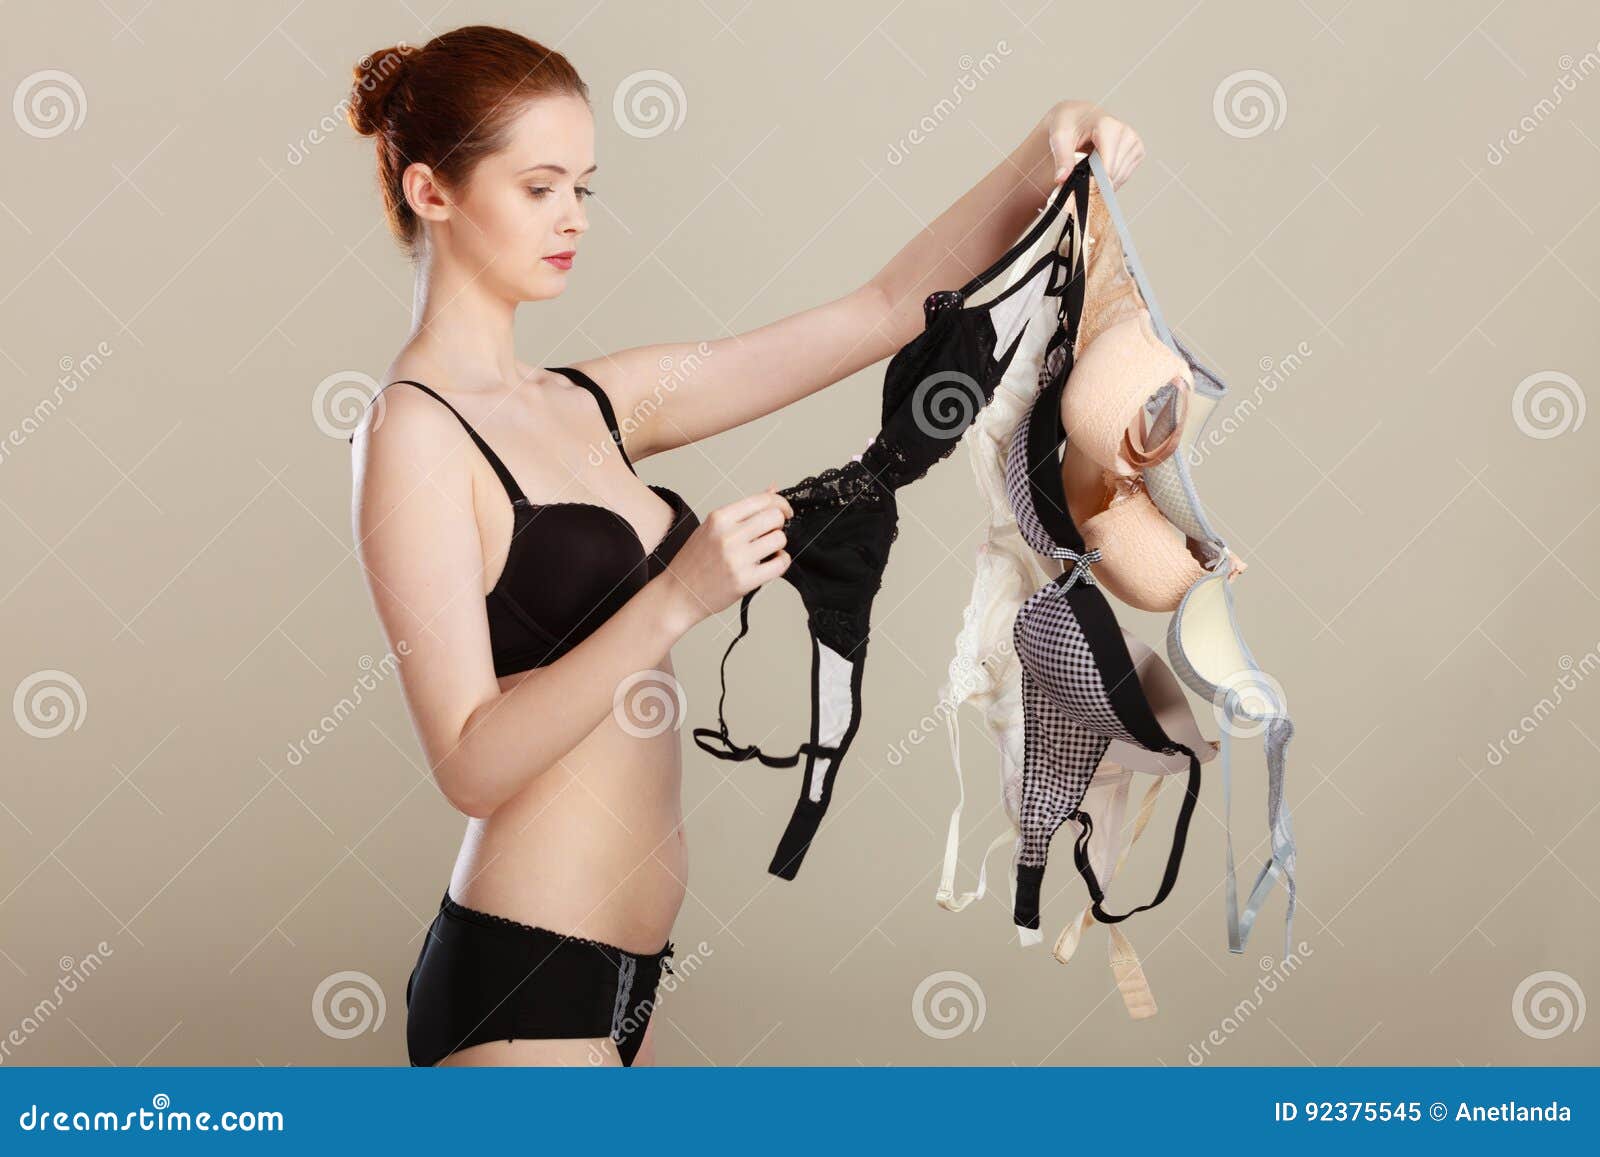 194 Many Bras Stock Photos - Free & Royalty-Free Stock Photos from  Dreamstime